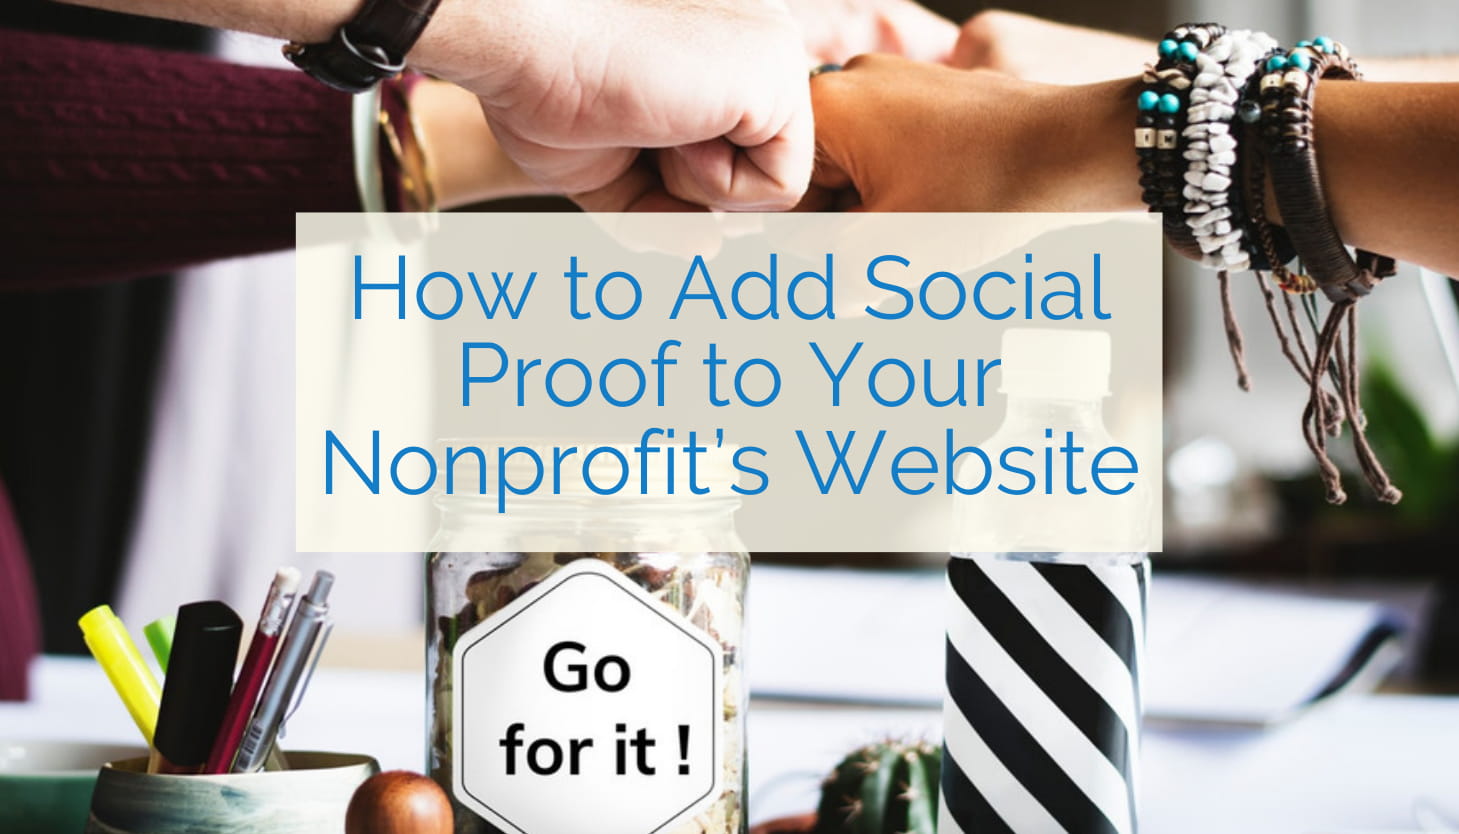 How to Add Social Proof to Your Nonprofit’s Website